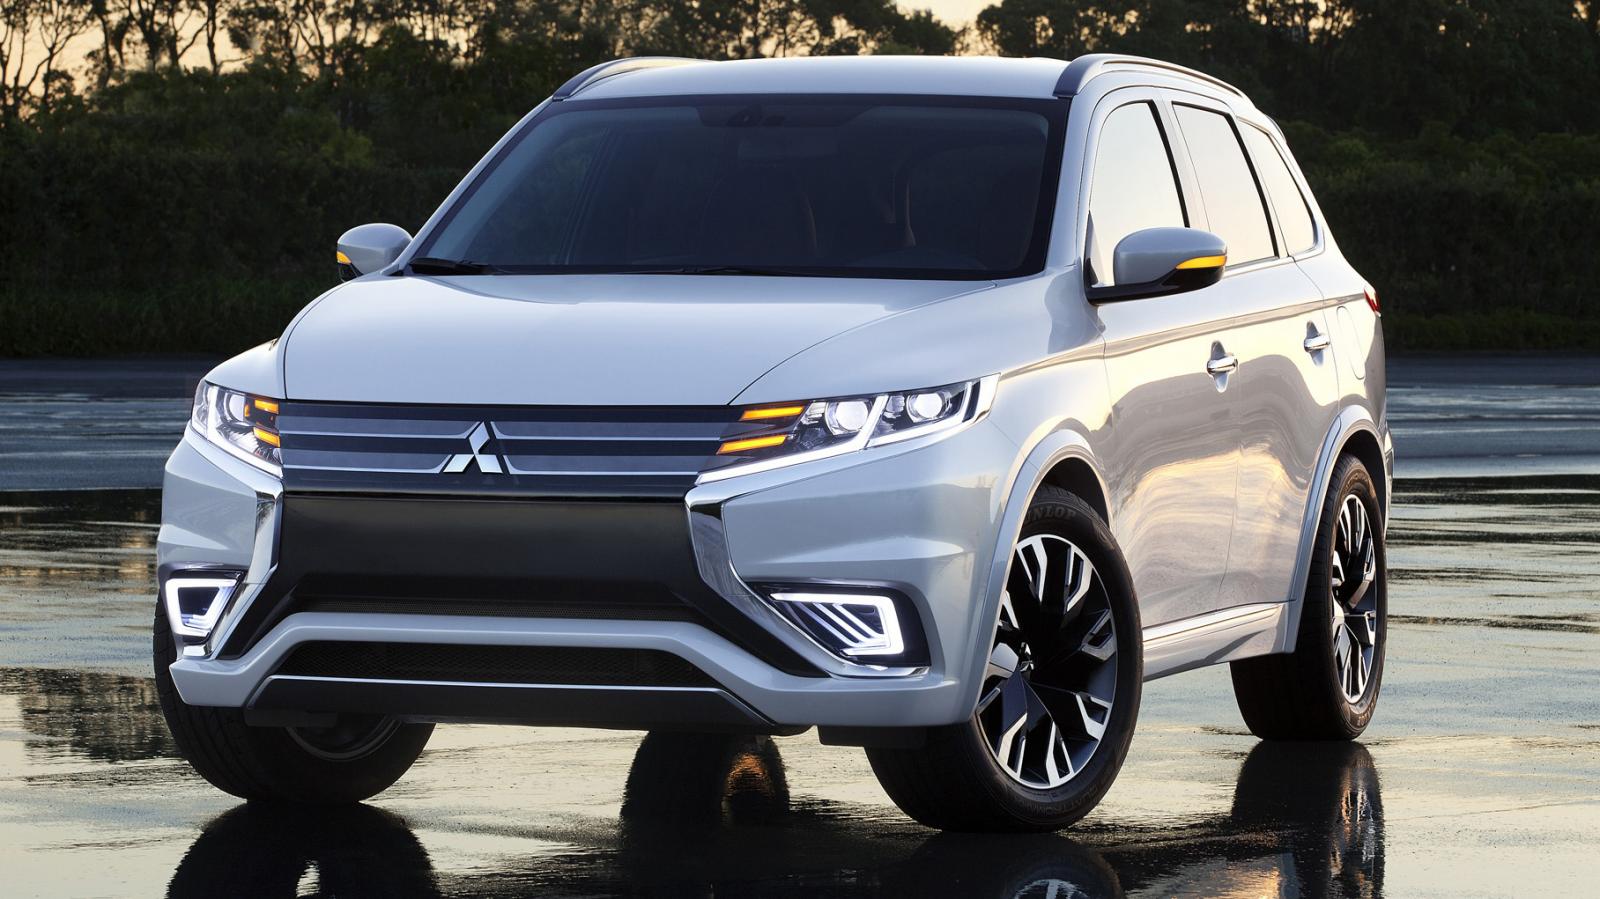 2016 Mitsubishi Outlander Facelift Spied Ahead of New York Auto Show ...